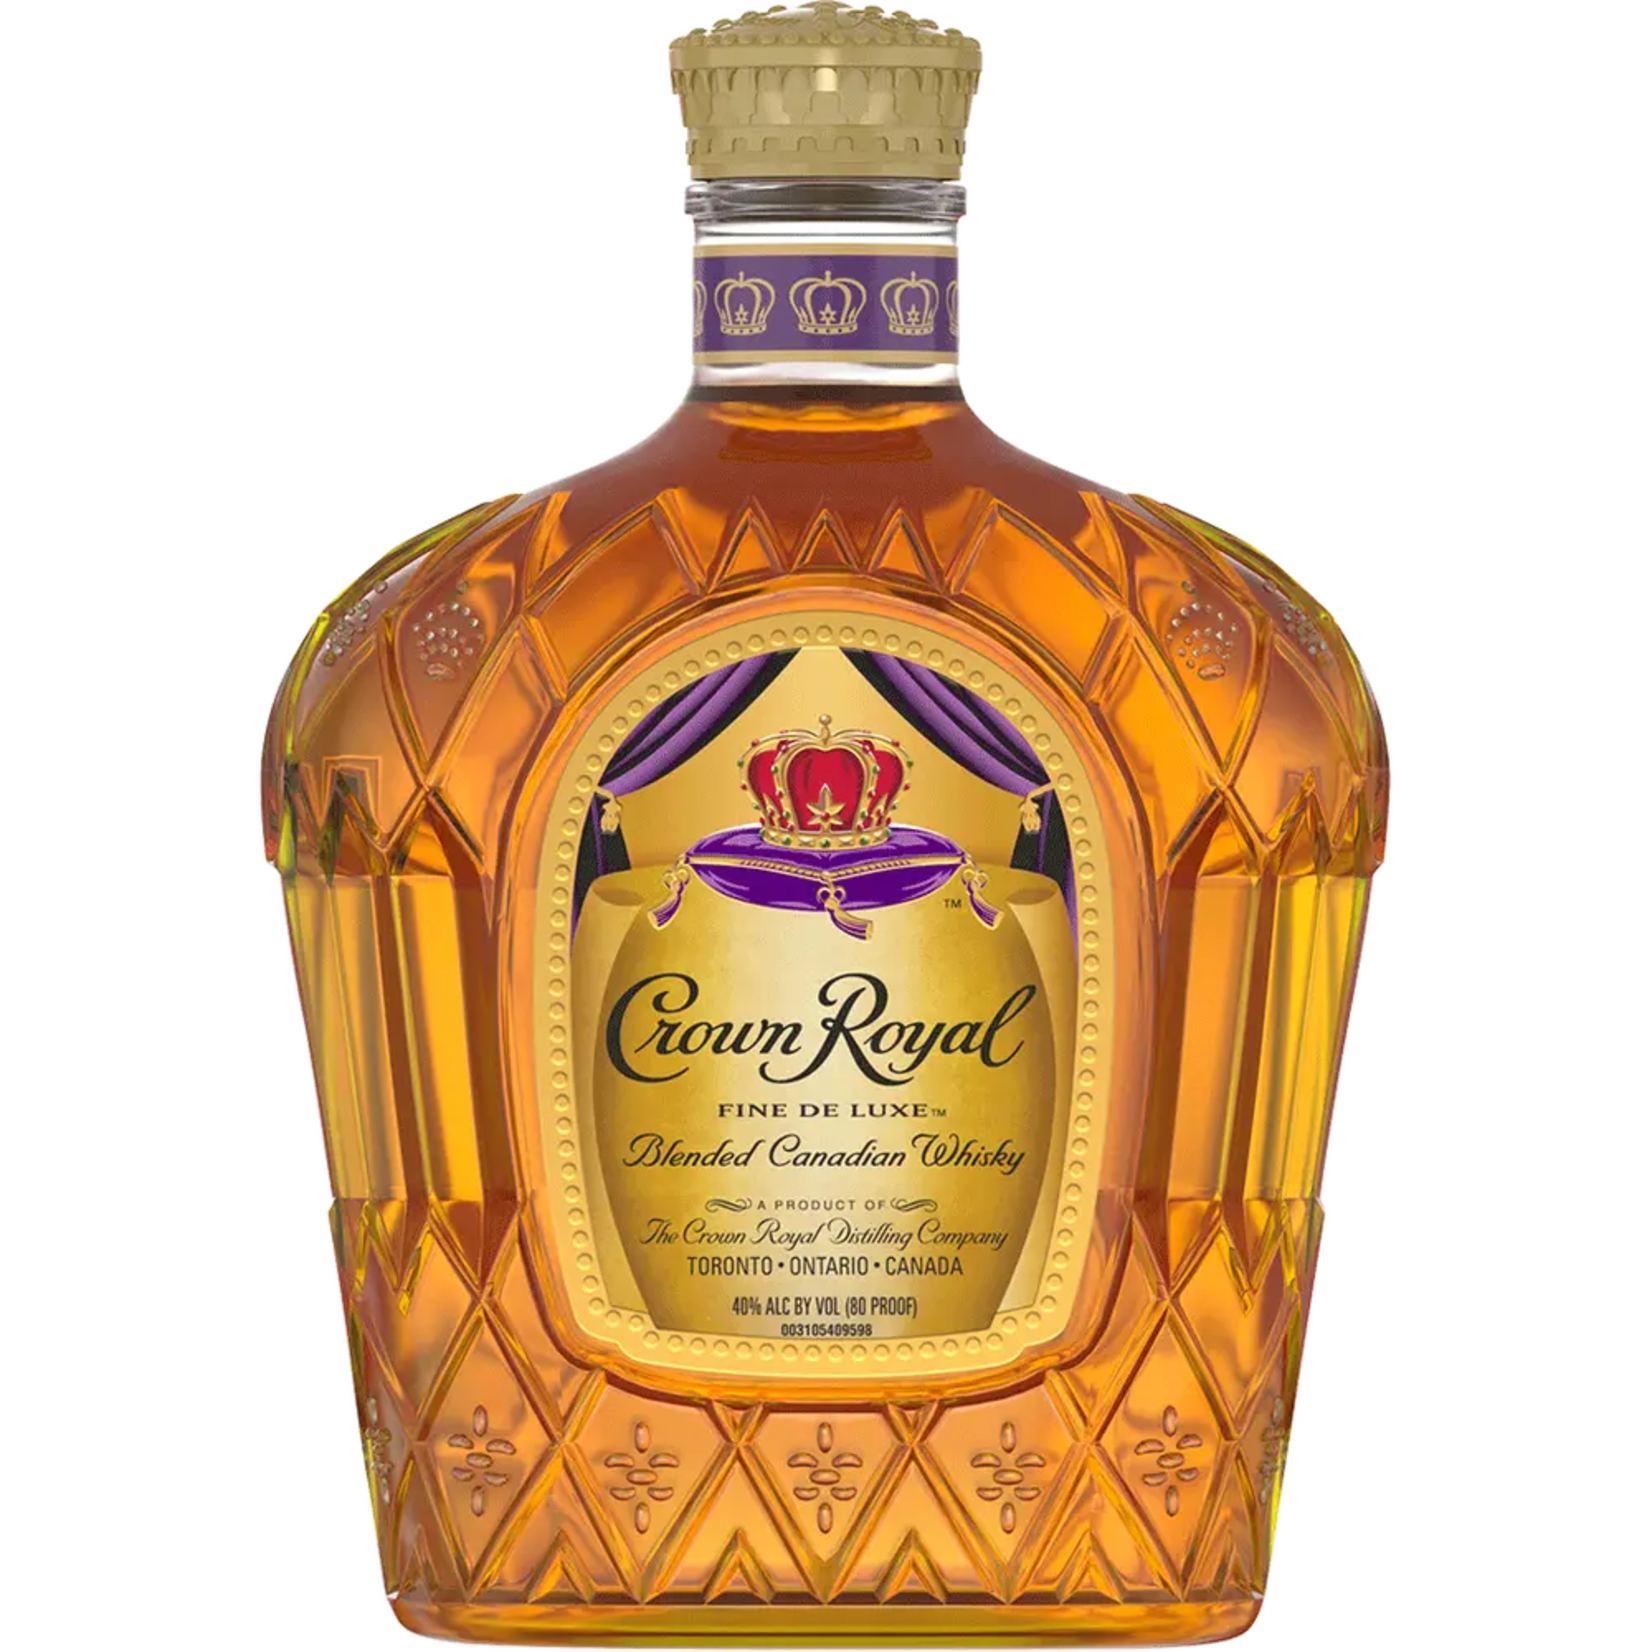 Crown Royal Crown Royal Canadian Whisky Fine Deluxe 80Proof 750ml